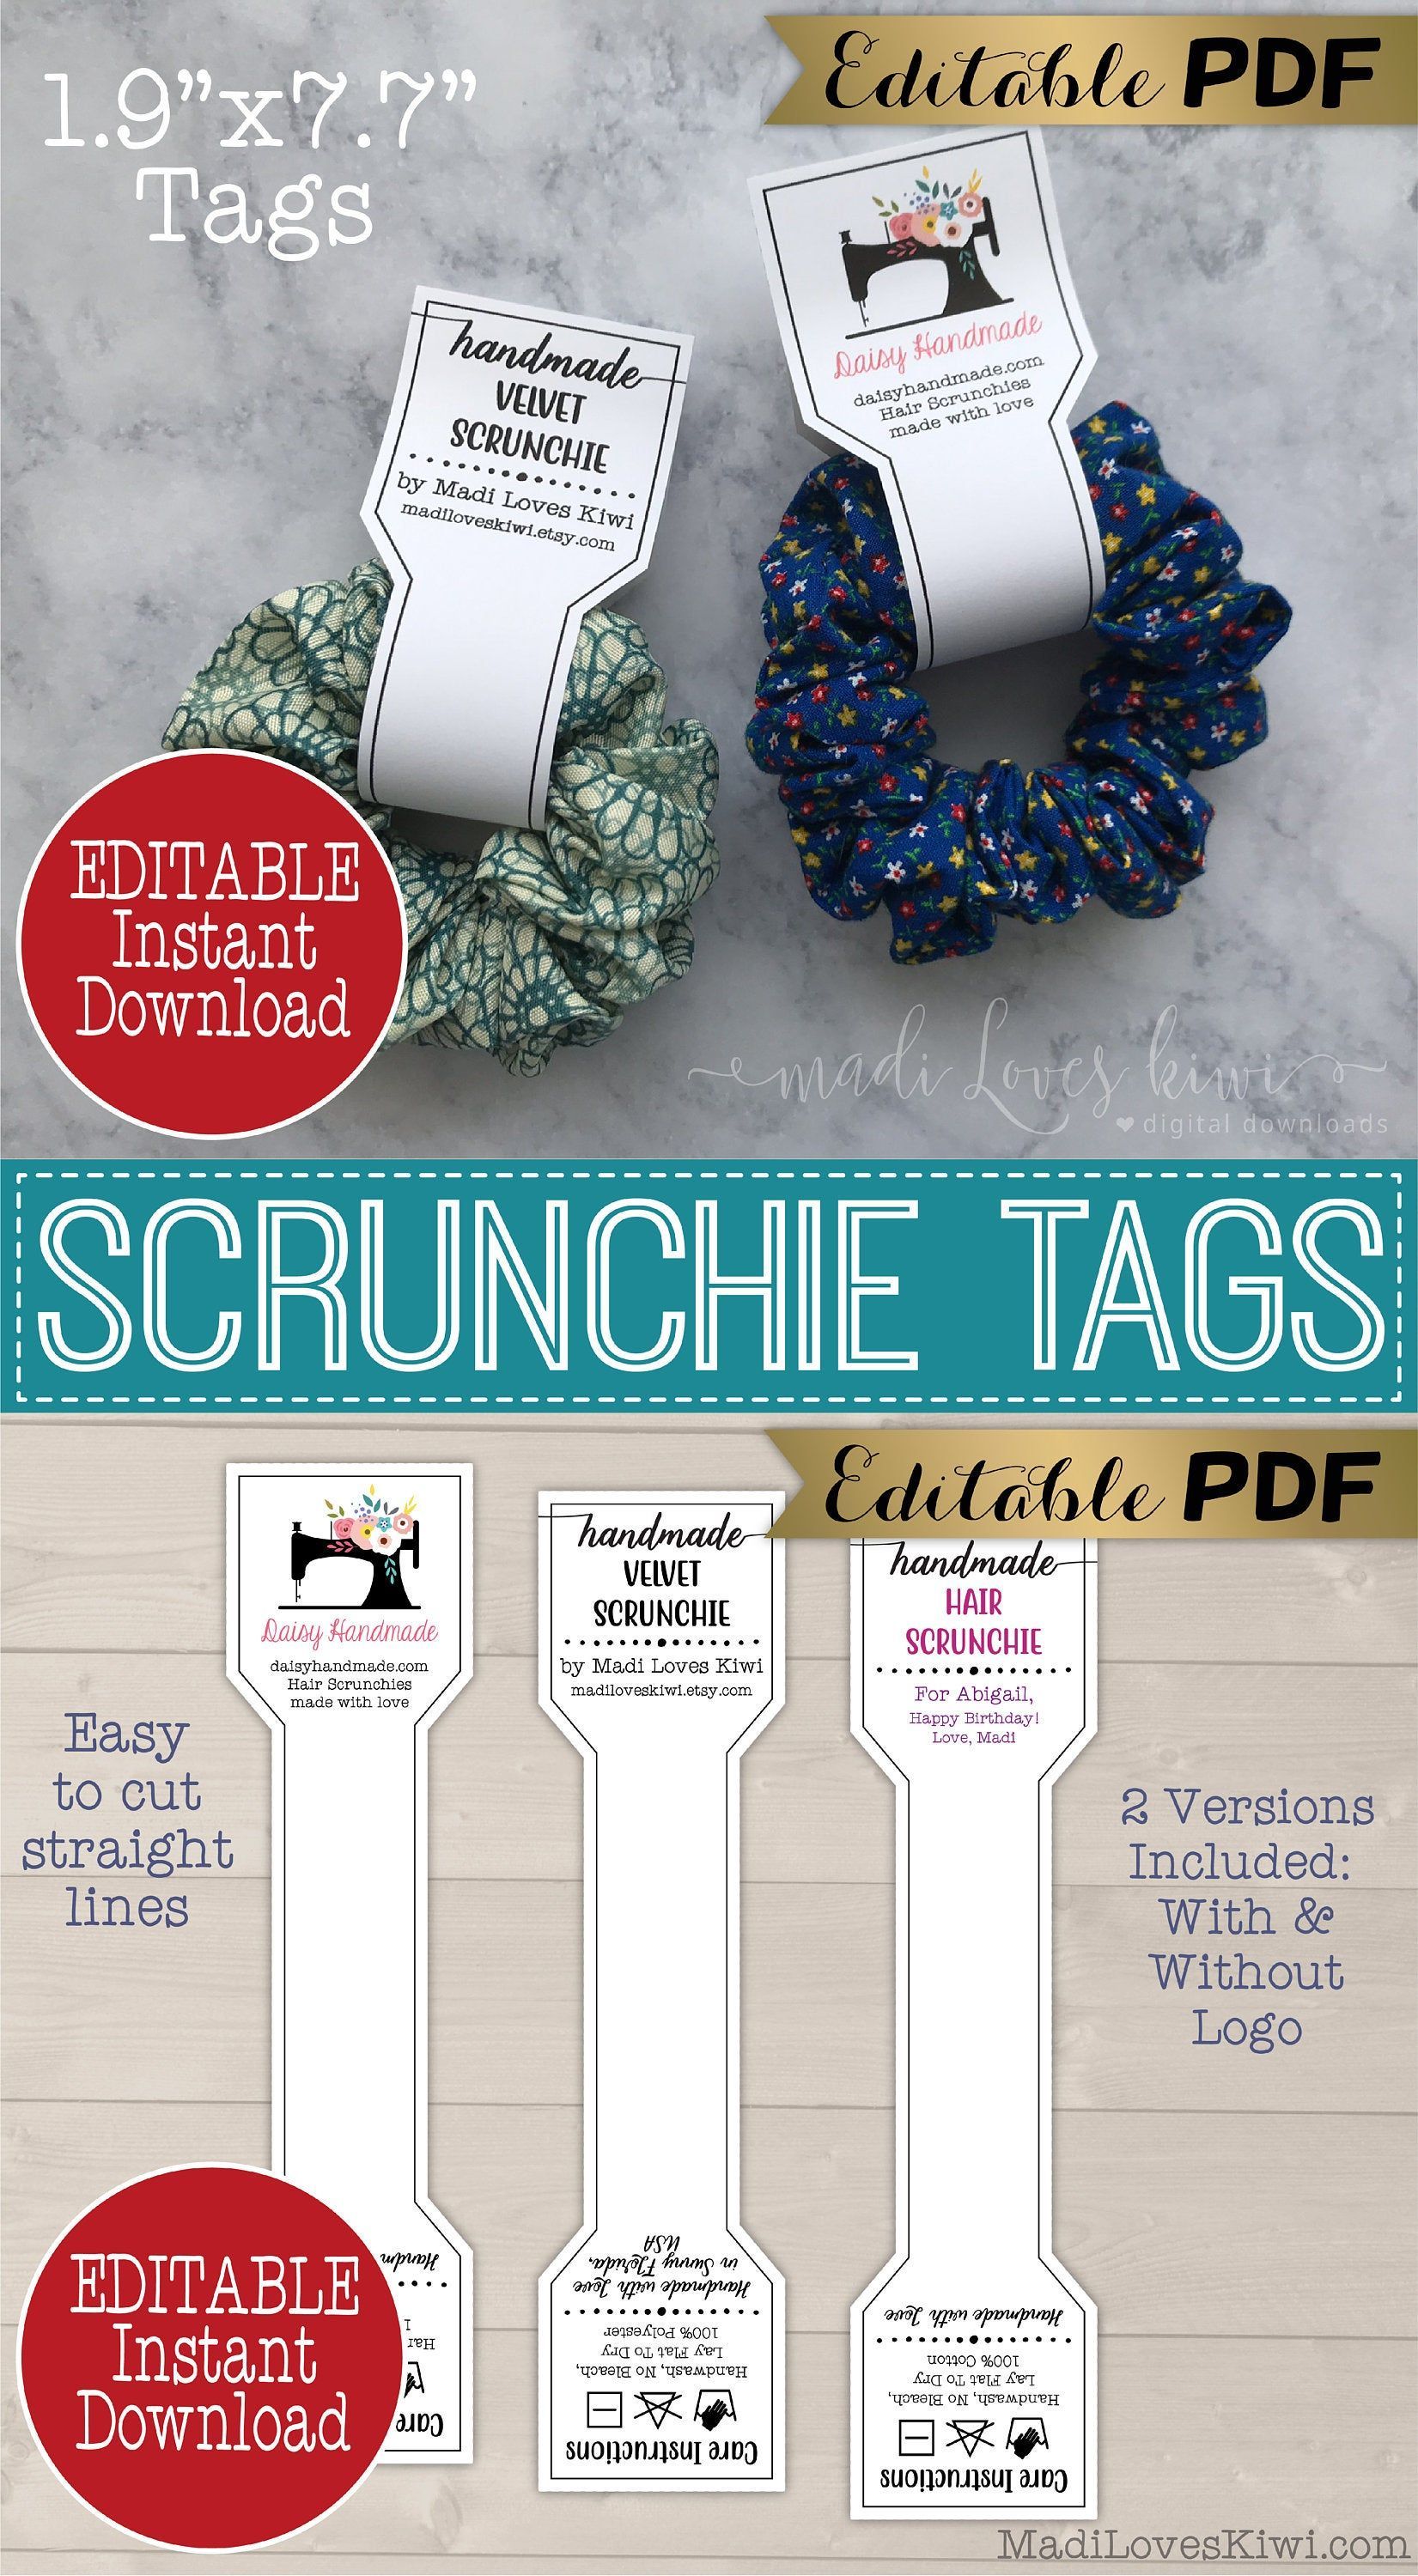 EDITABLE Hair Scrunchie Tag, Printable Handmade Product Label Logo, Digital PDF Template, Care Instruction Sewing Packaging Instant Download -   diy Scrunchie packaging